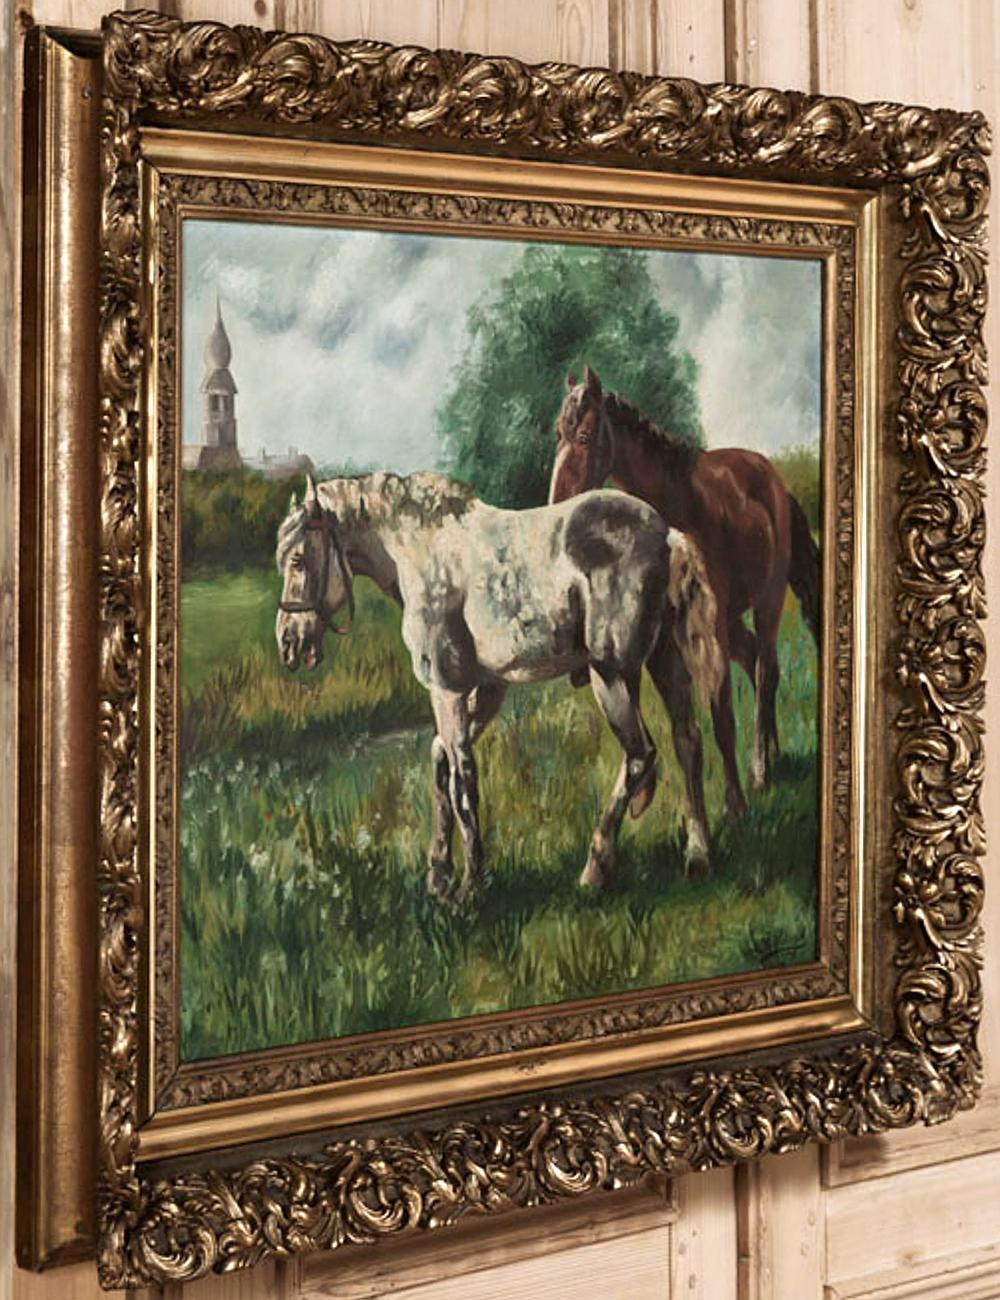 Romantic Antique Framed Dutch Oil Painting on Canvas by G. Diervjck, Dated 1907